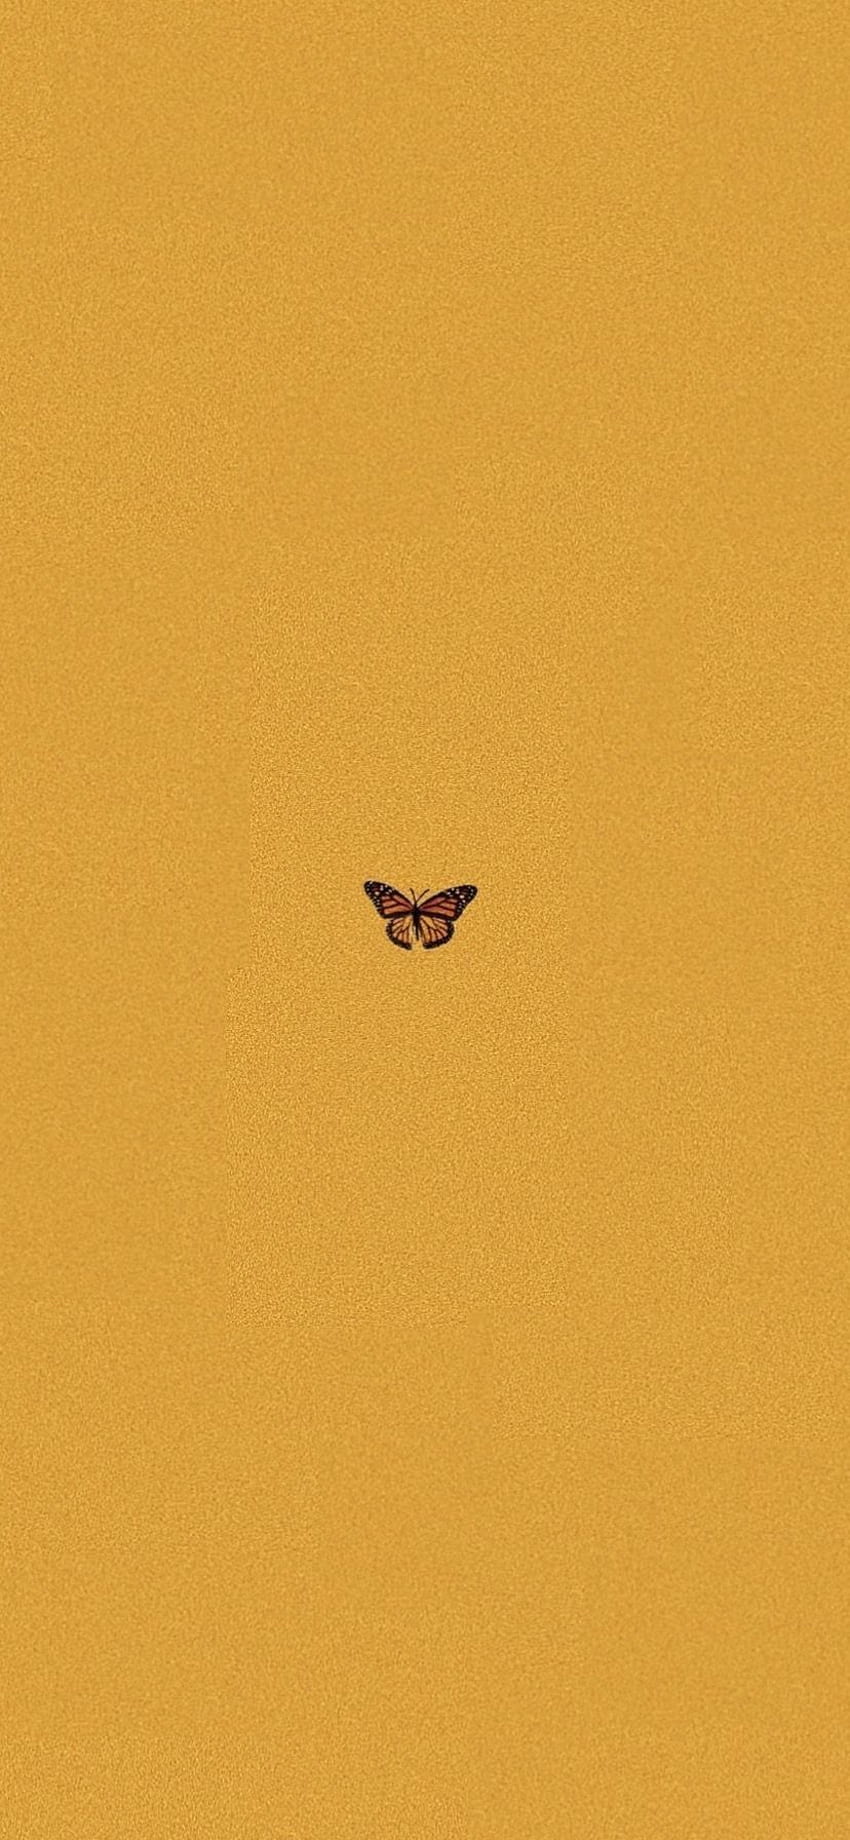 Yellow aesthetic butterfly IPhone X yellowaesthetic, yel. iPhone yellow, Simple iphone, iPhone tumblr aesthetic, Simple Vintage HD phone wallpaper